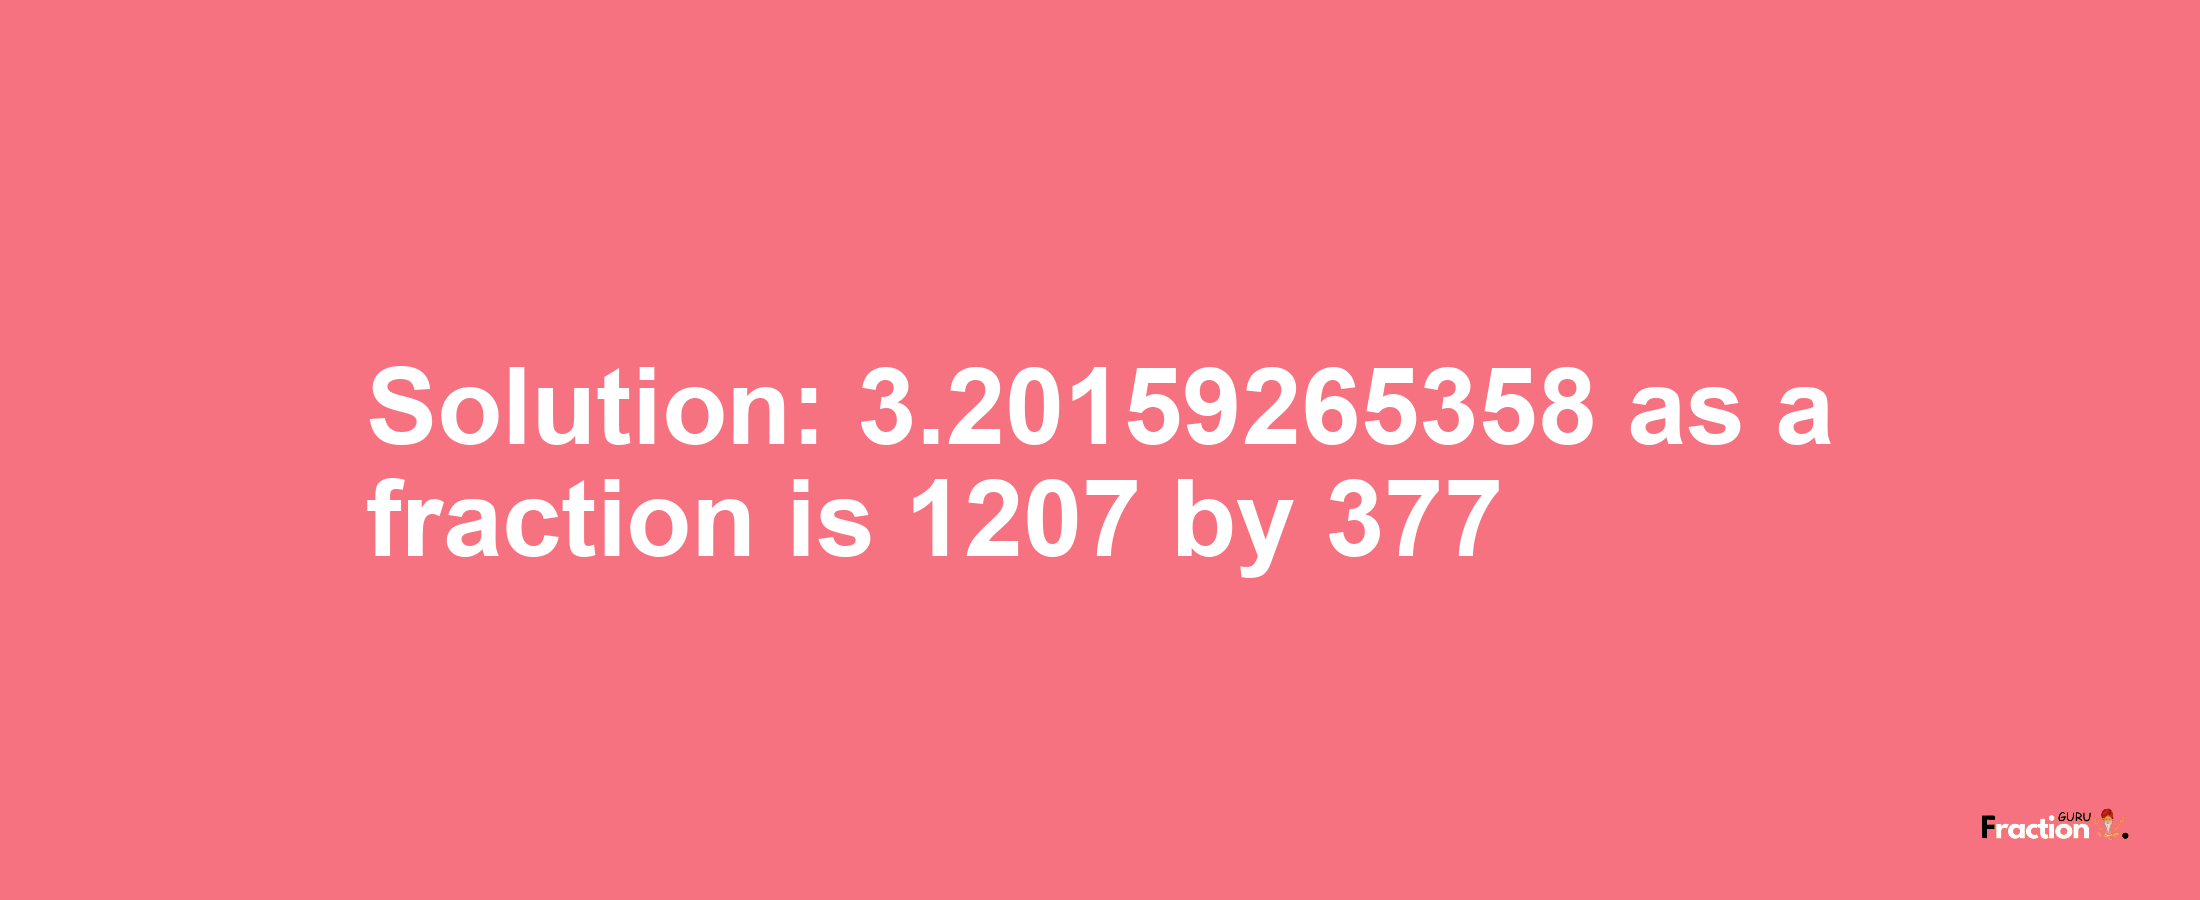 Solution:3.20159265358 as a fraction is 1207/377